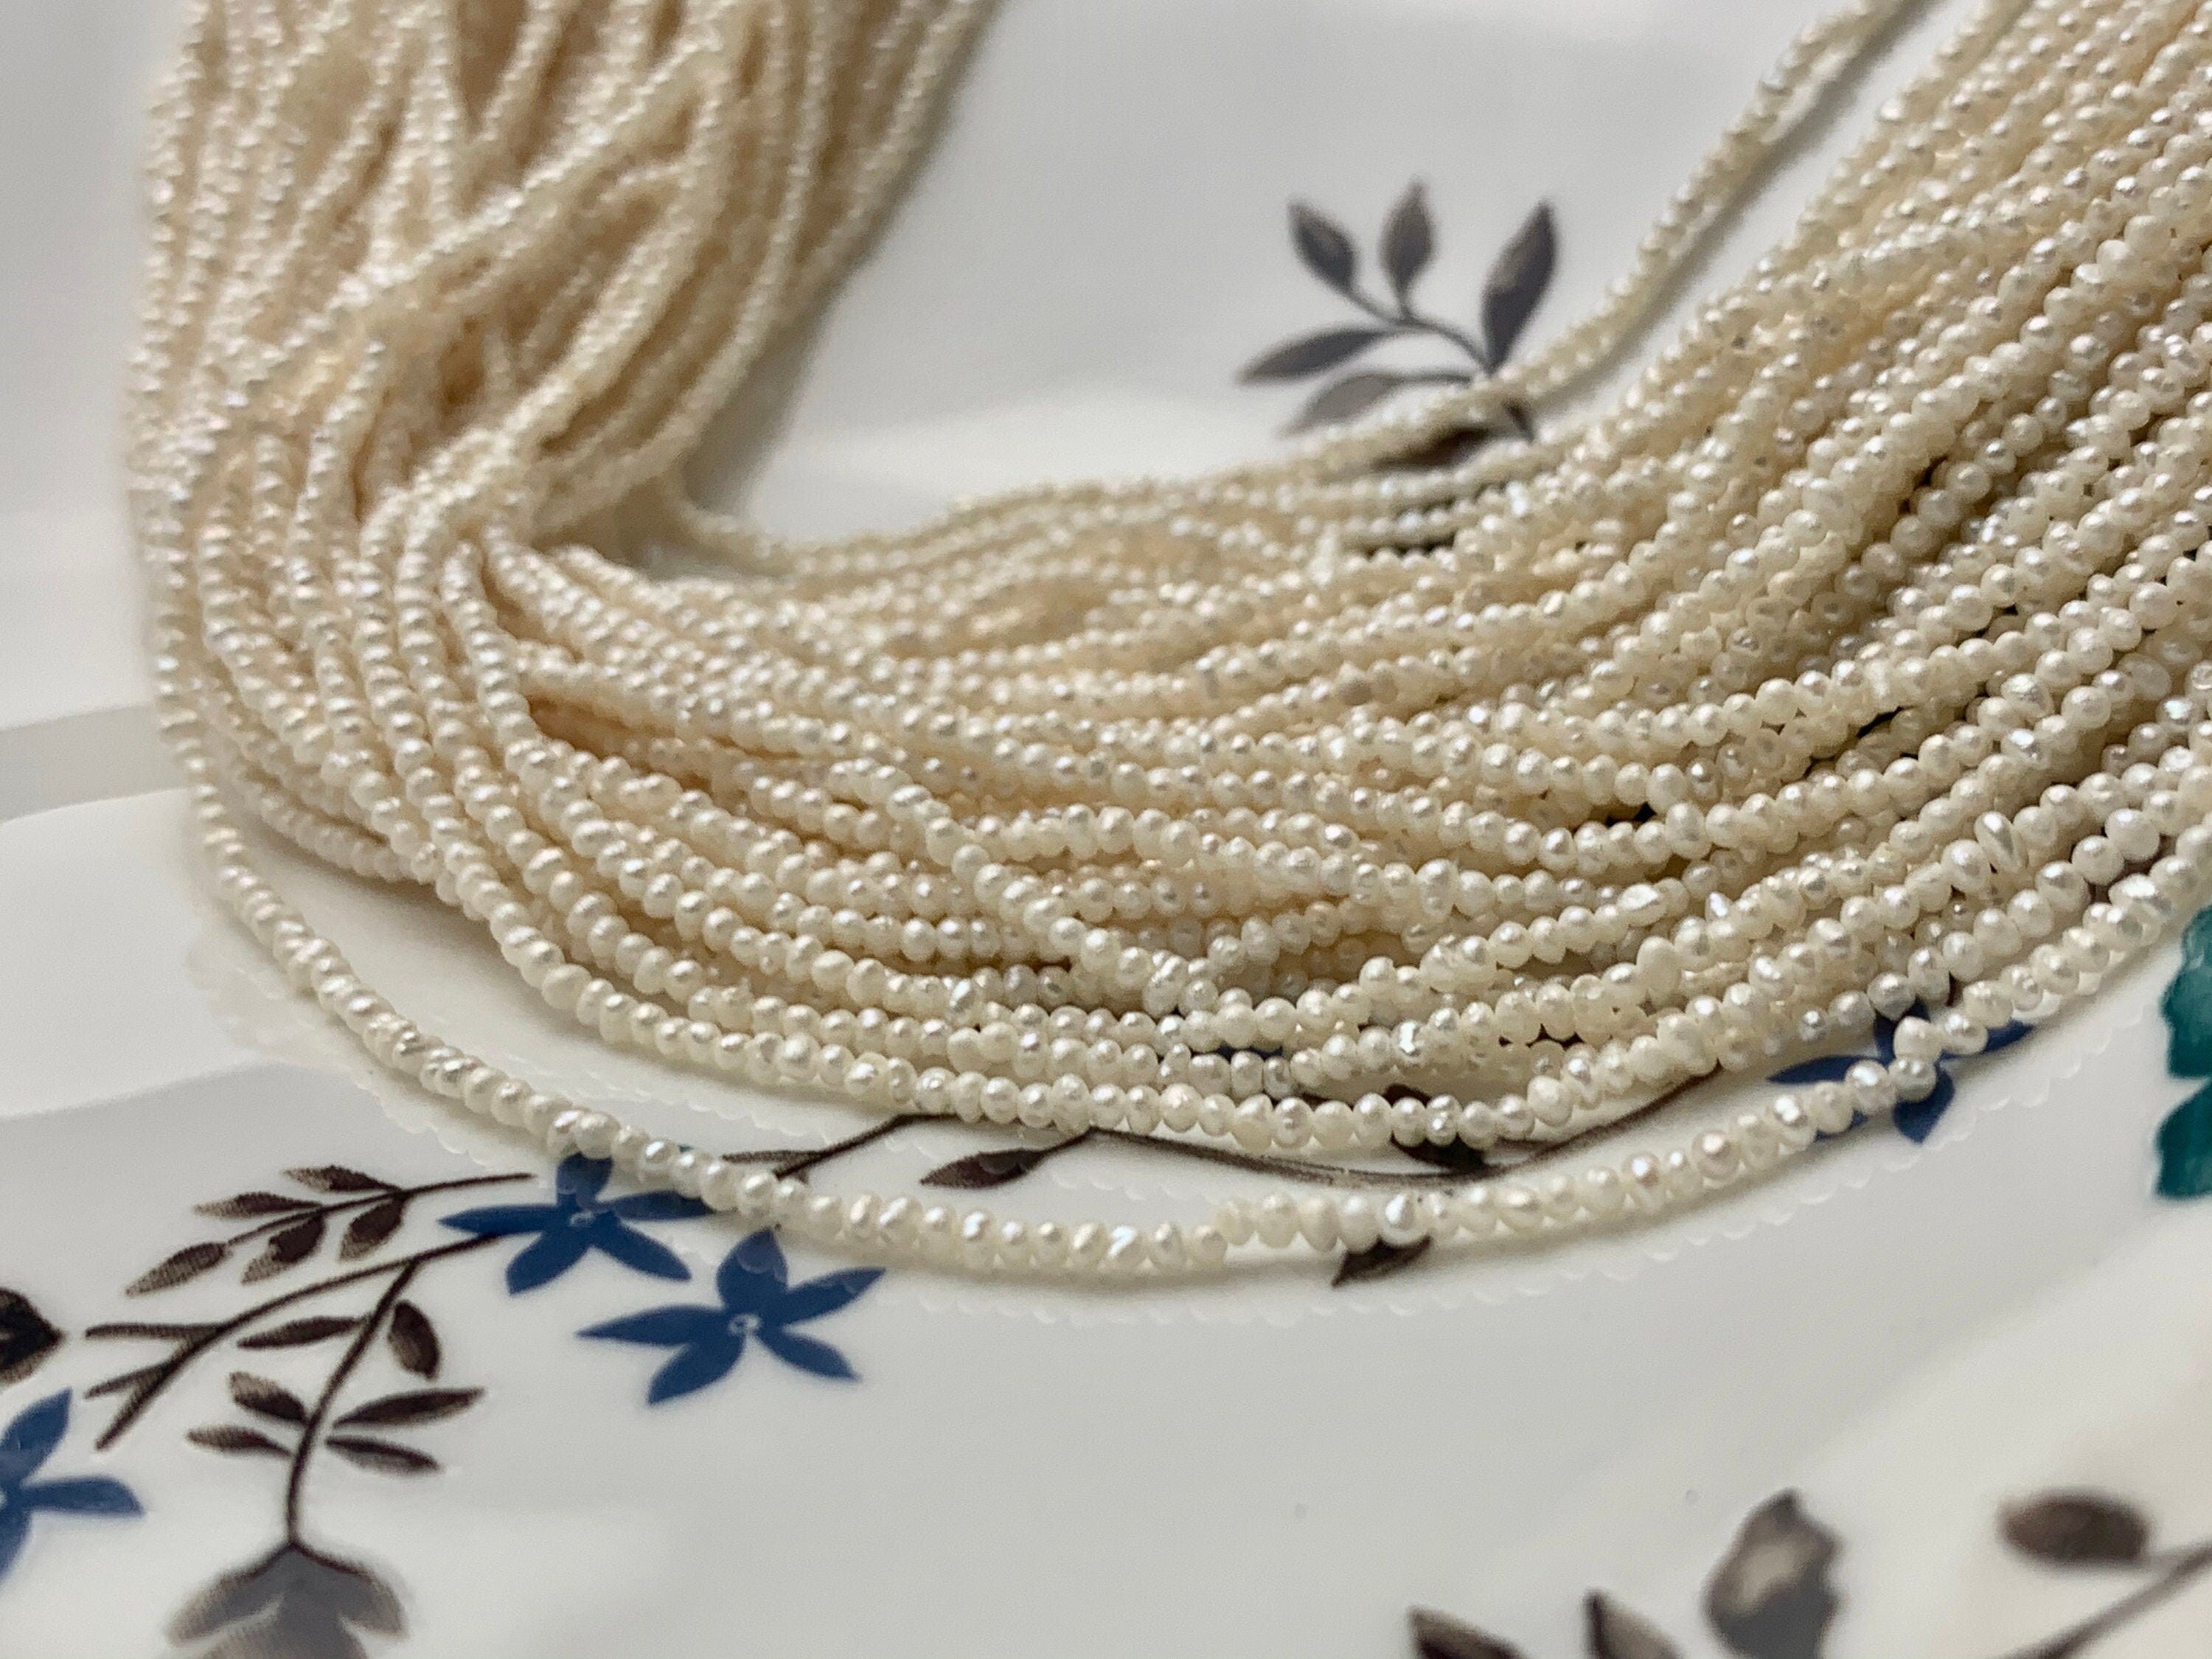 Tiny Natural White Seed Pearls - 1.5-2mm Freshwater Pearl Beads